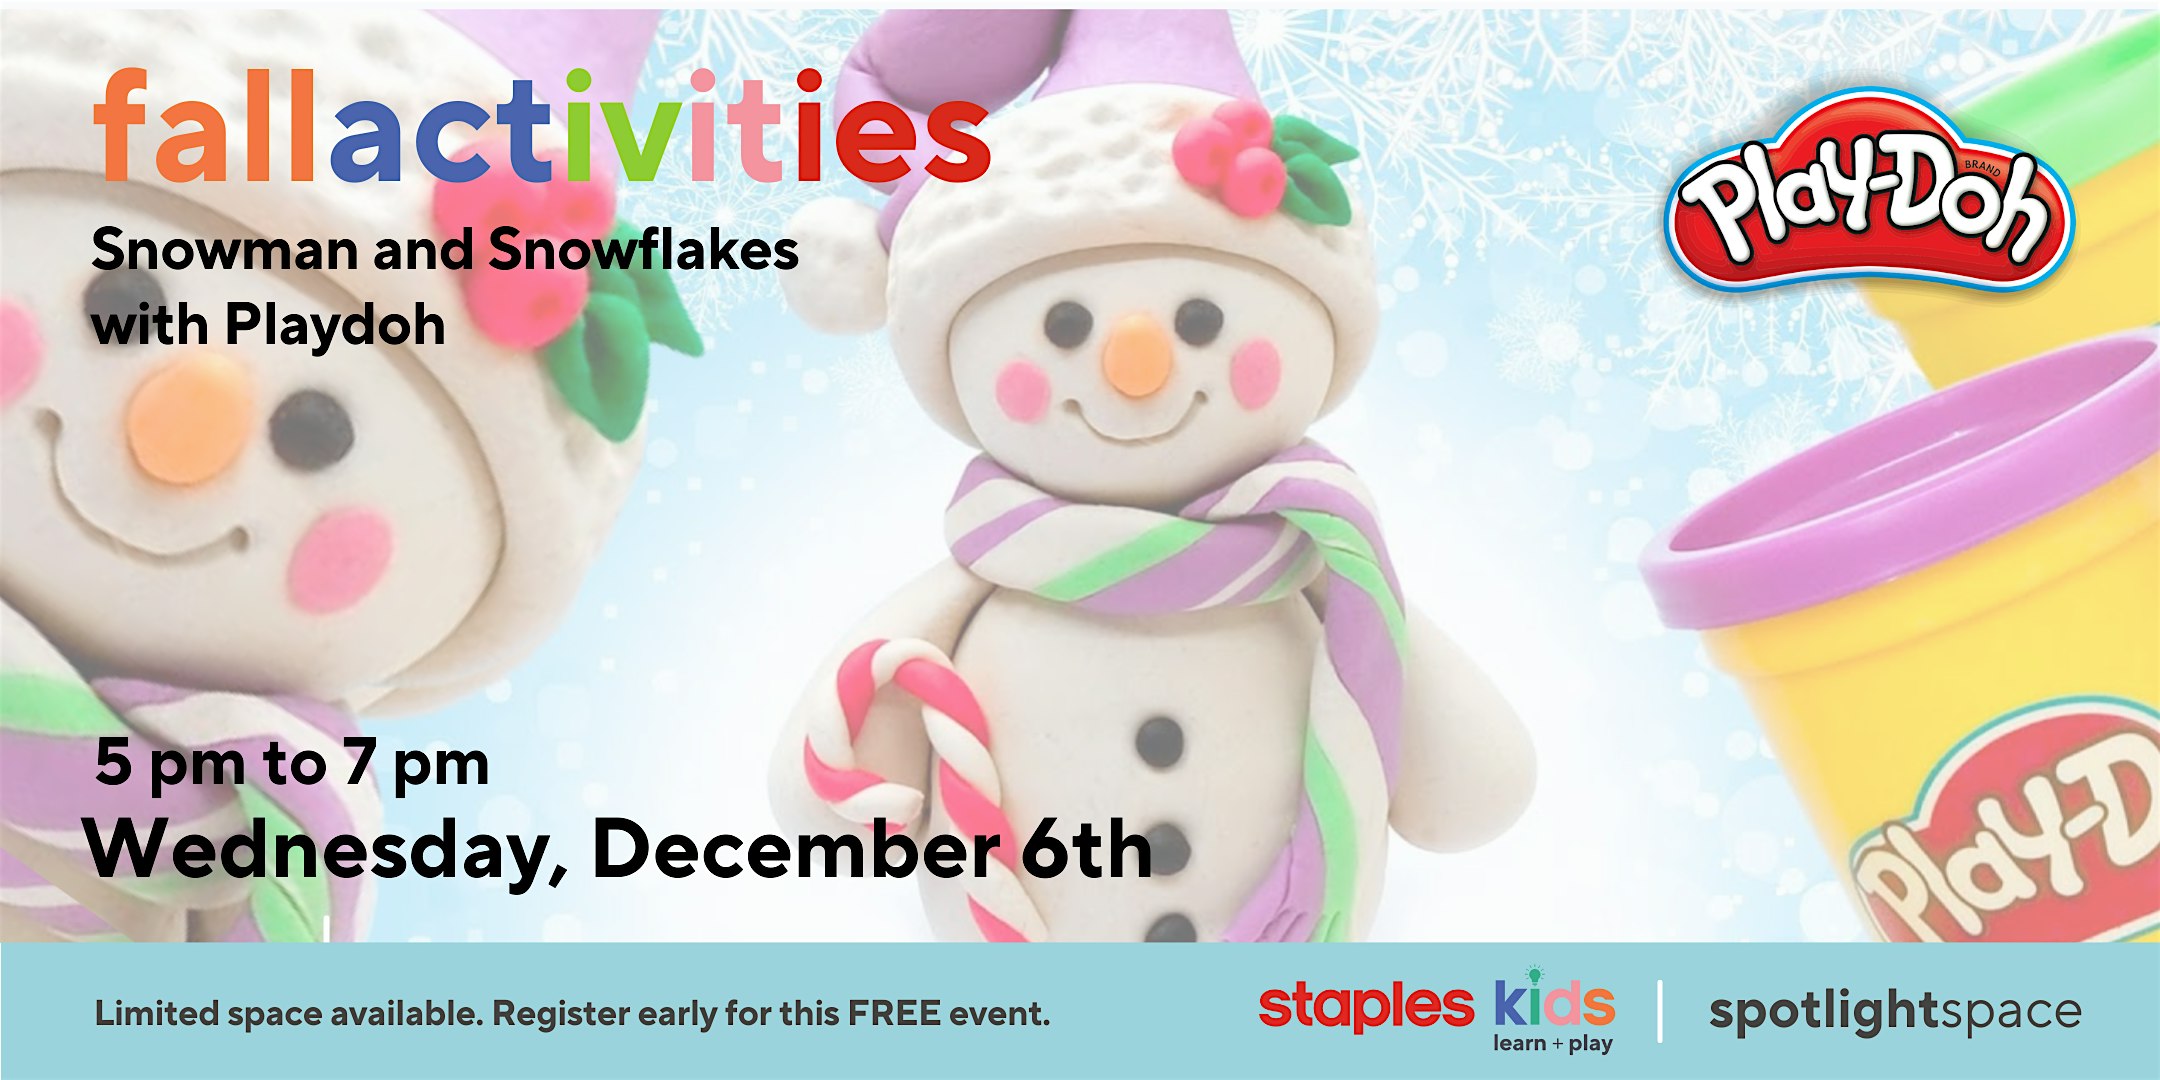 Snowman and Snowflakes with Playdoh